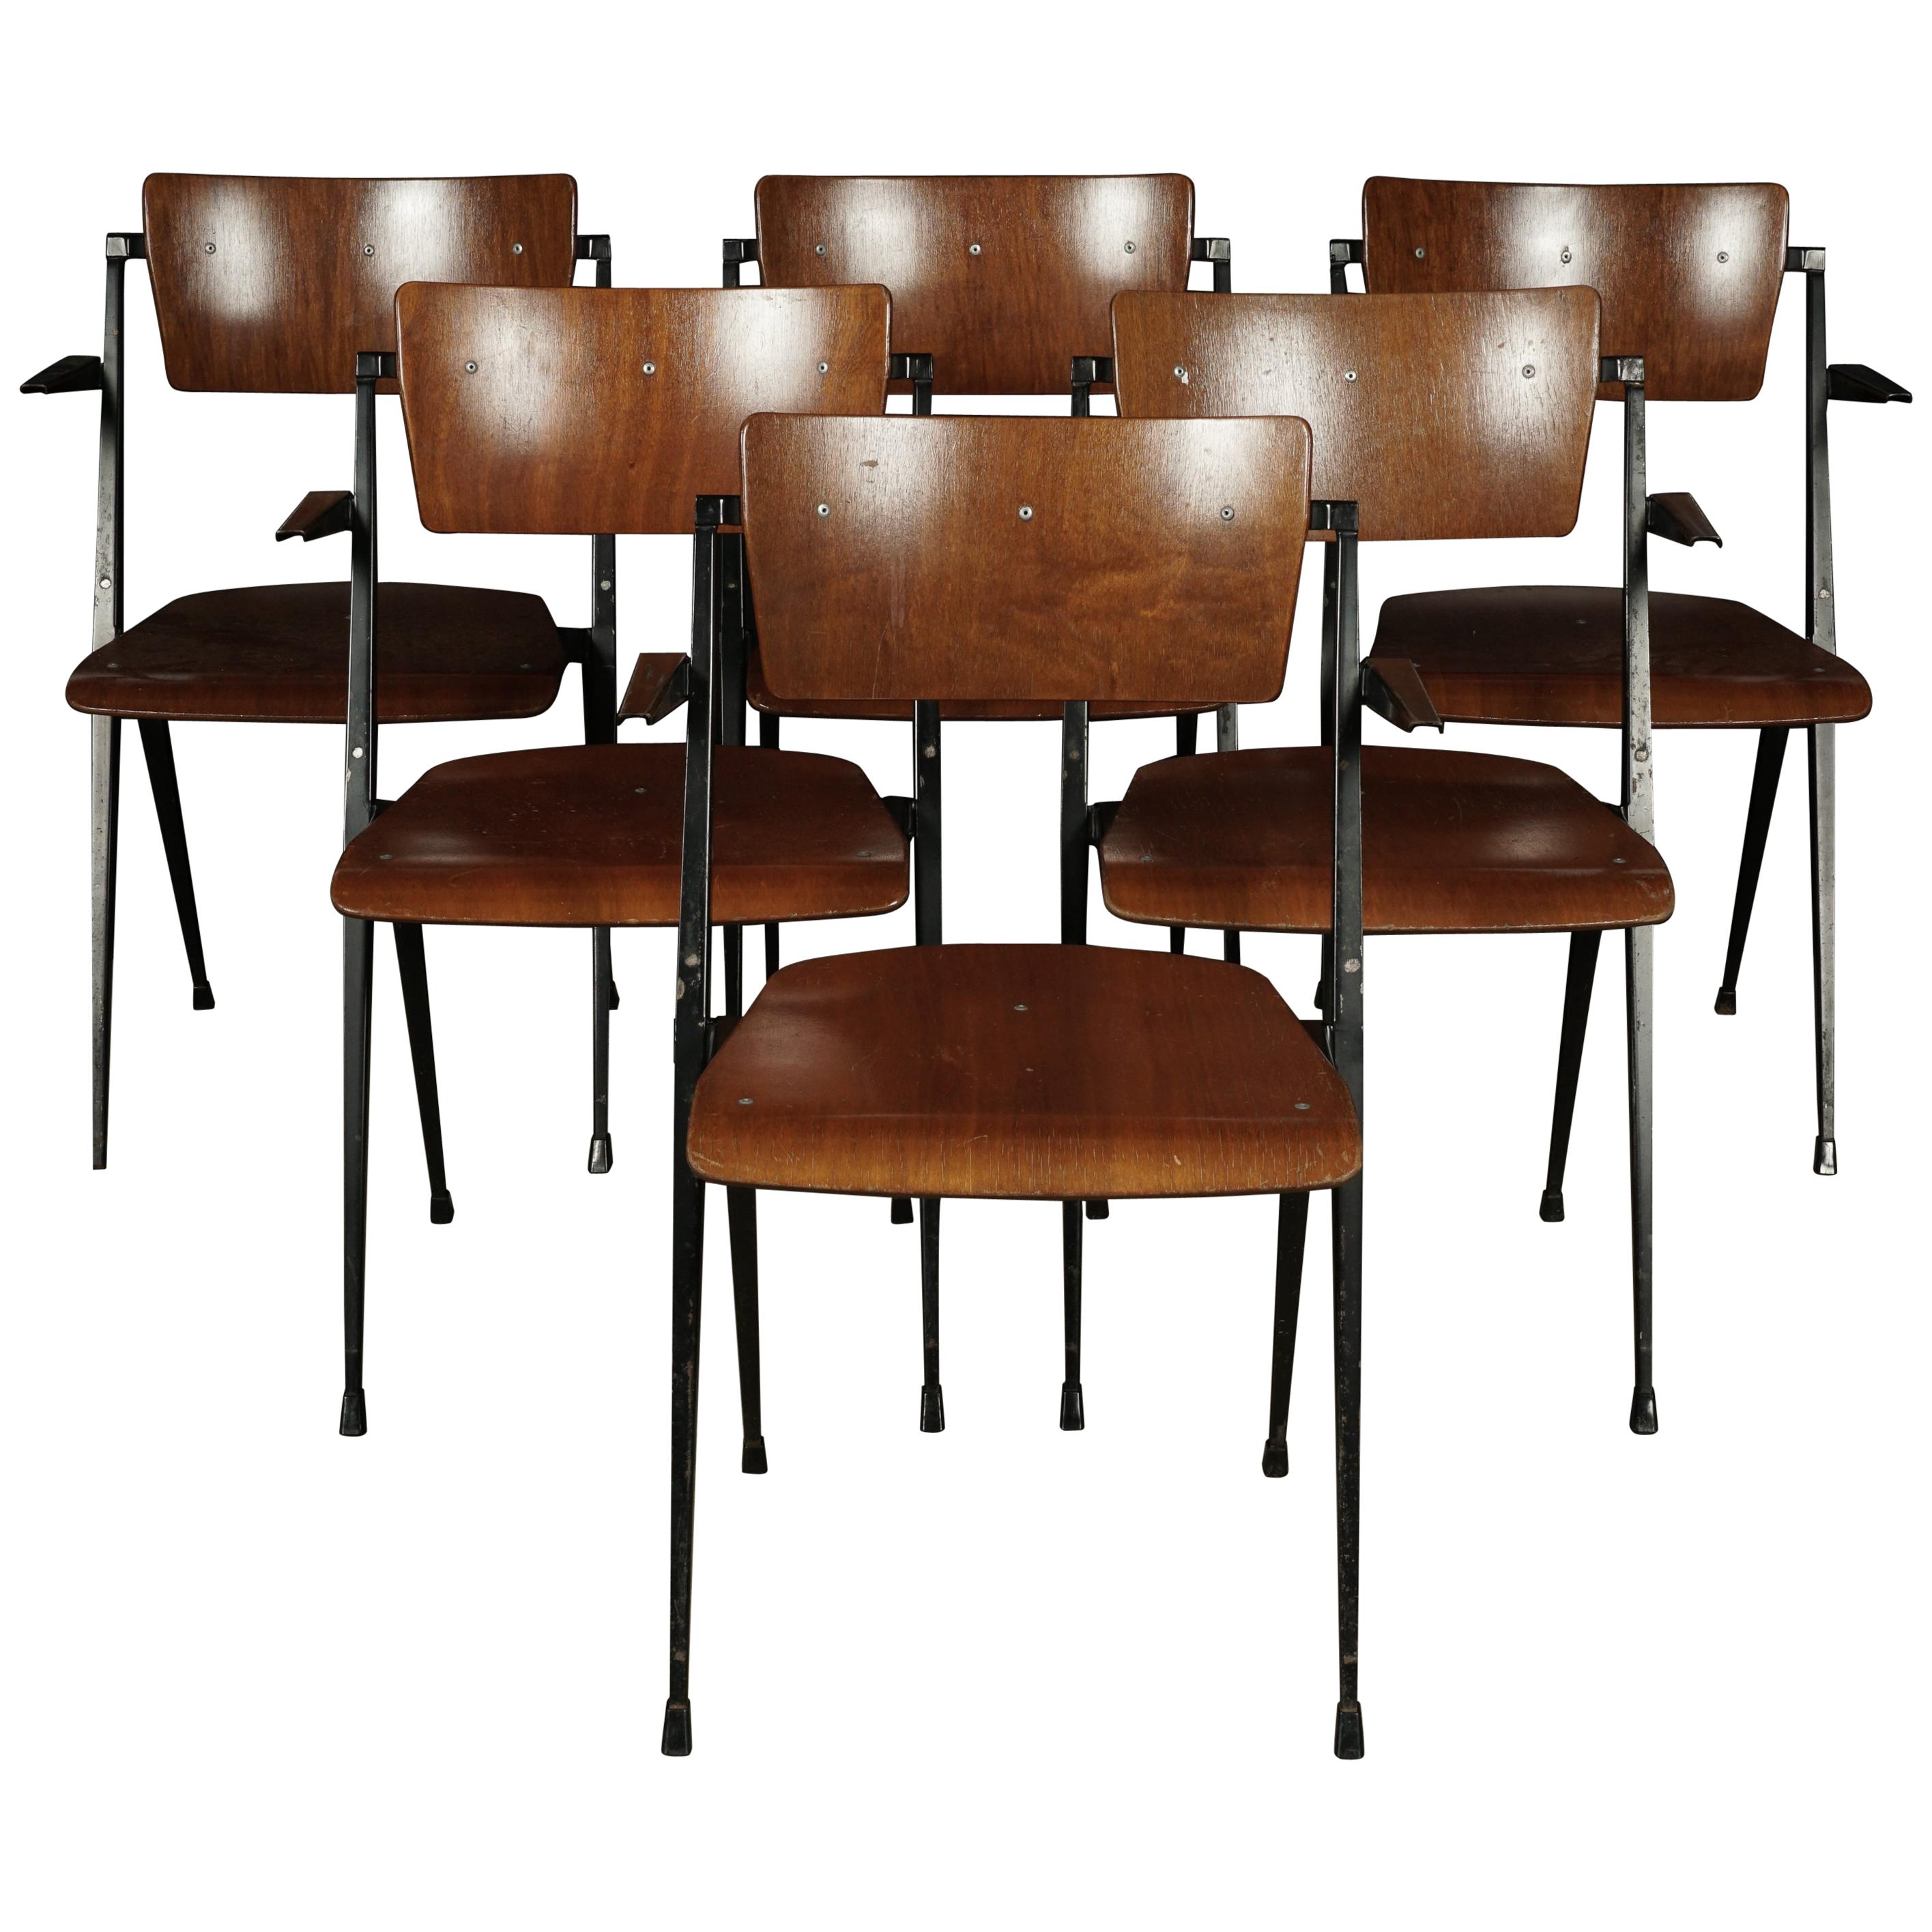 Rare Set of Six Stacking Chairs Designed by Wm. Rietveld, circa 1960 For Sale